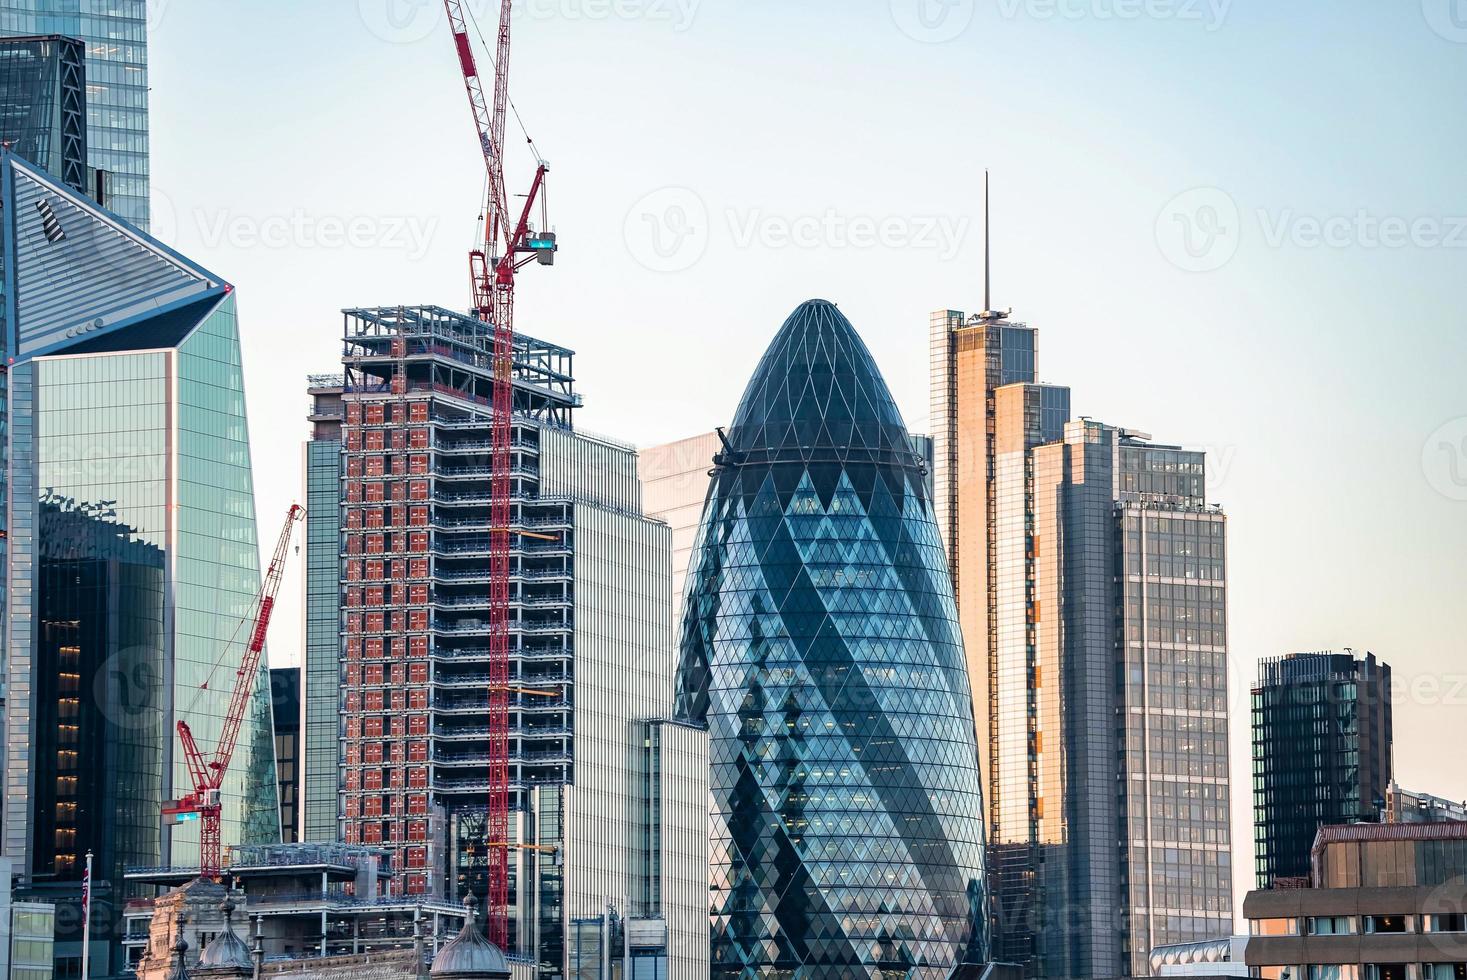 This panoramic view of the City Square Mile financial district of London. photo